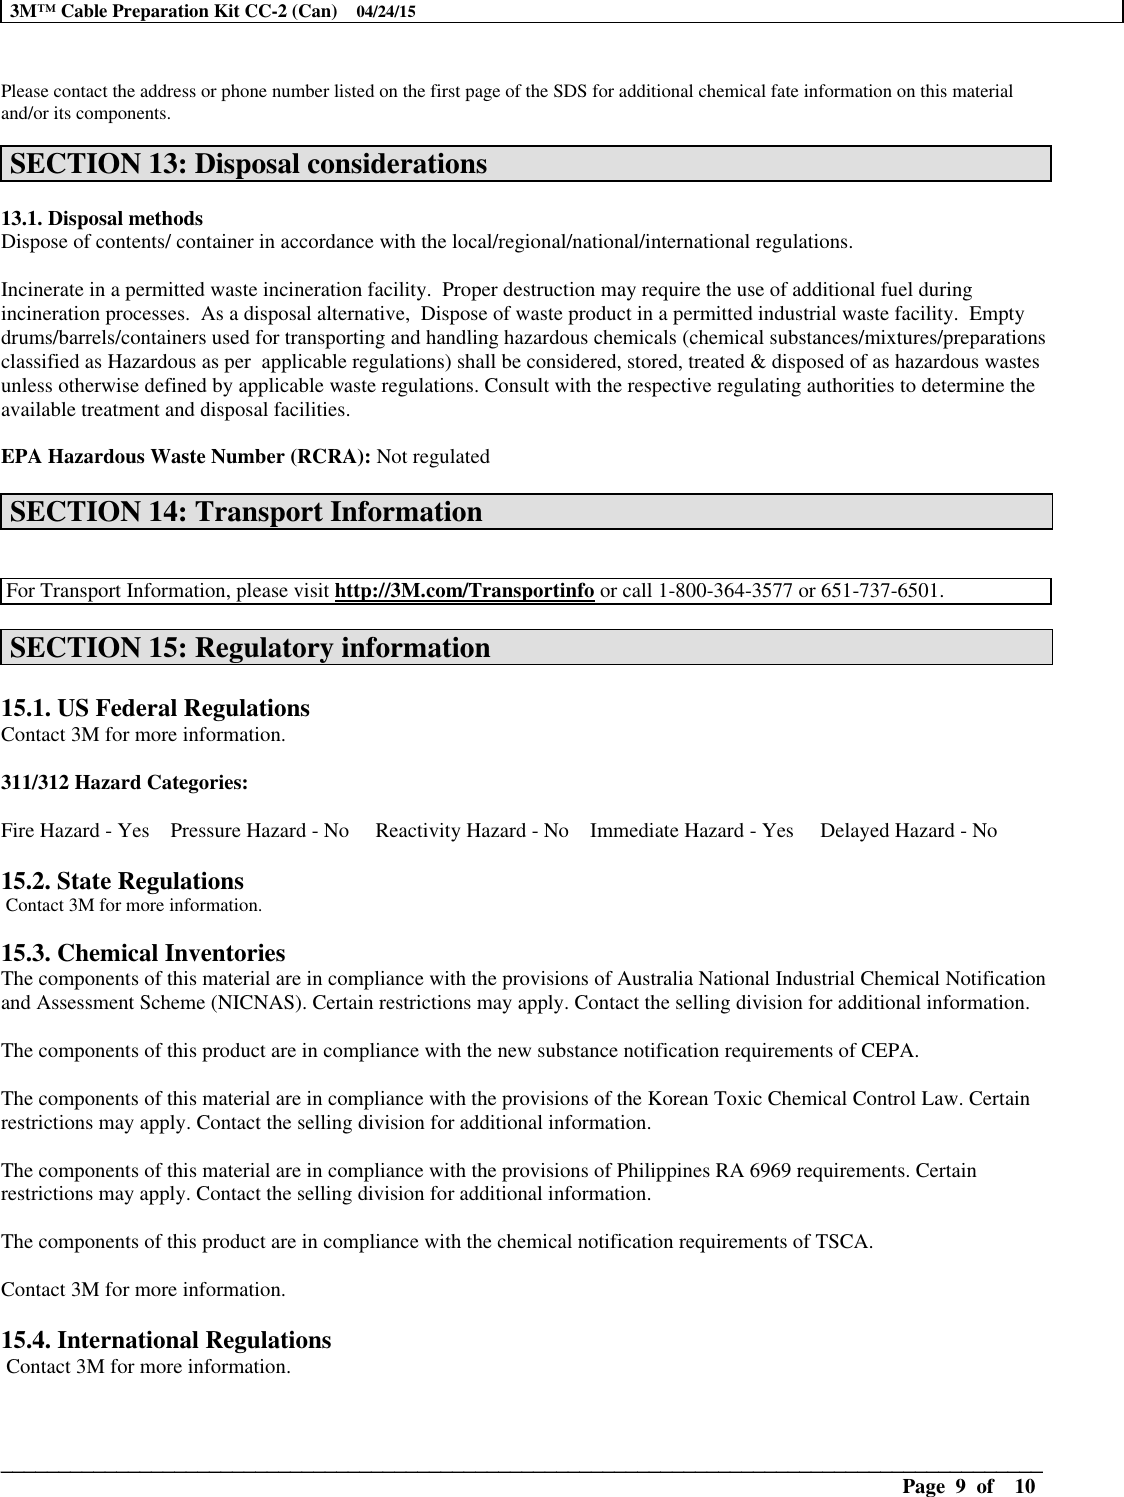 Page 11 of 12 - 127200-MSDS